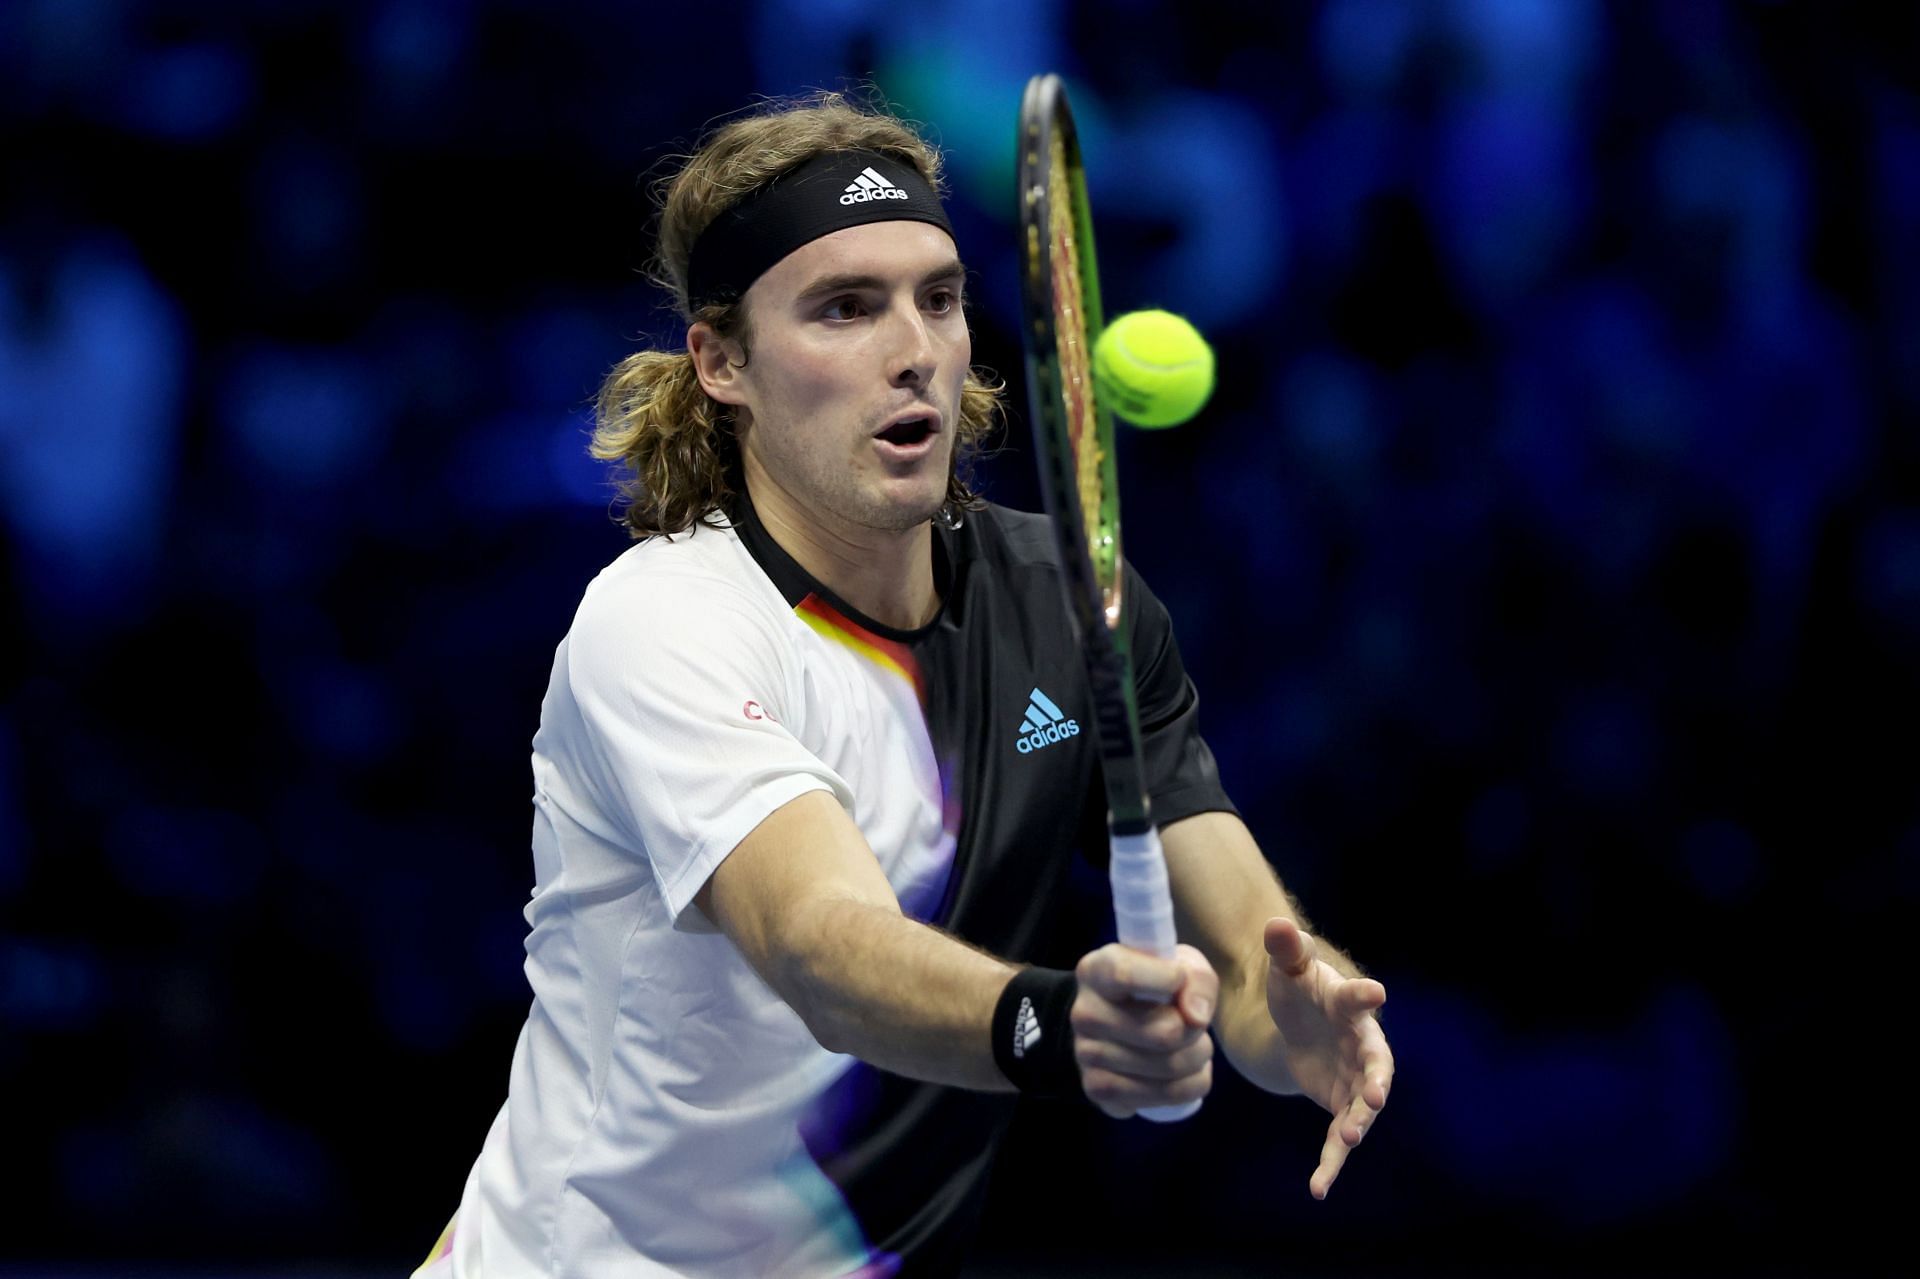 Stefanos Tsitsipas in action at the ATP Finals